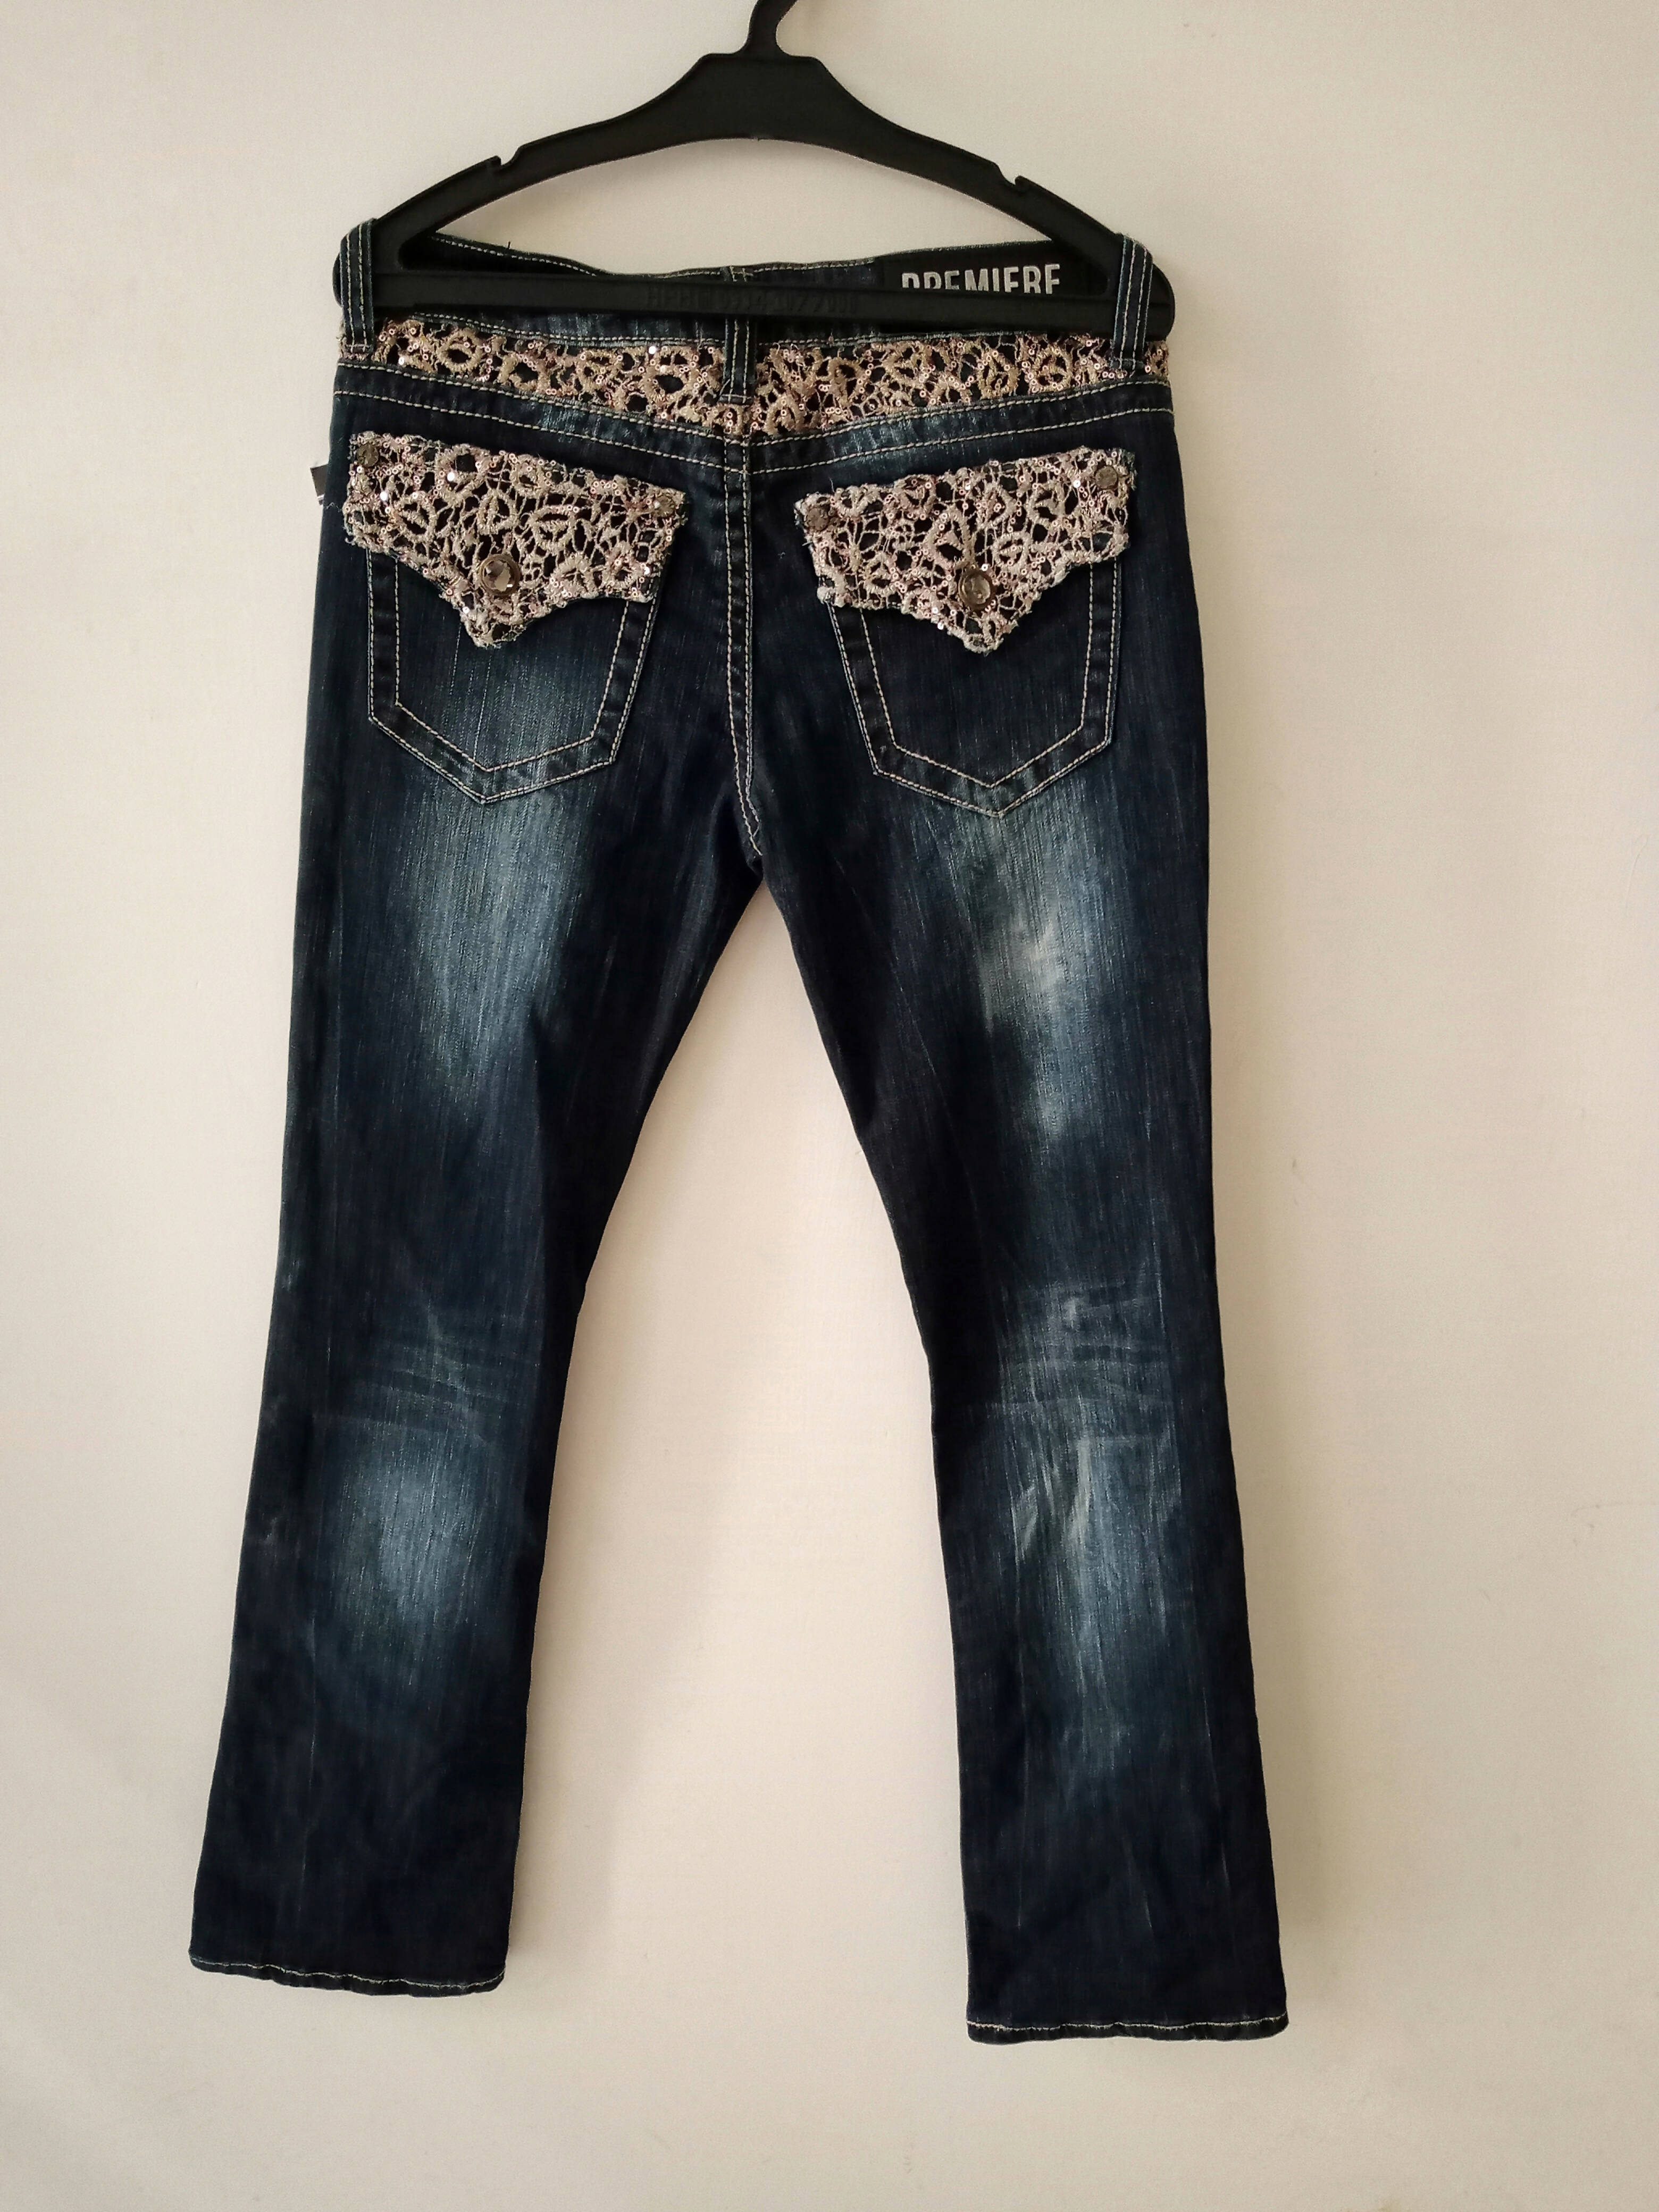 Rue 21 | Boot Cut Pants | Women Bottoms & Pants | Medium | Brand New with Tags